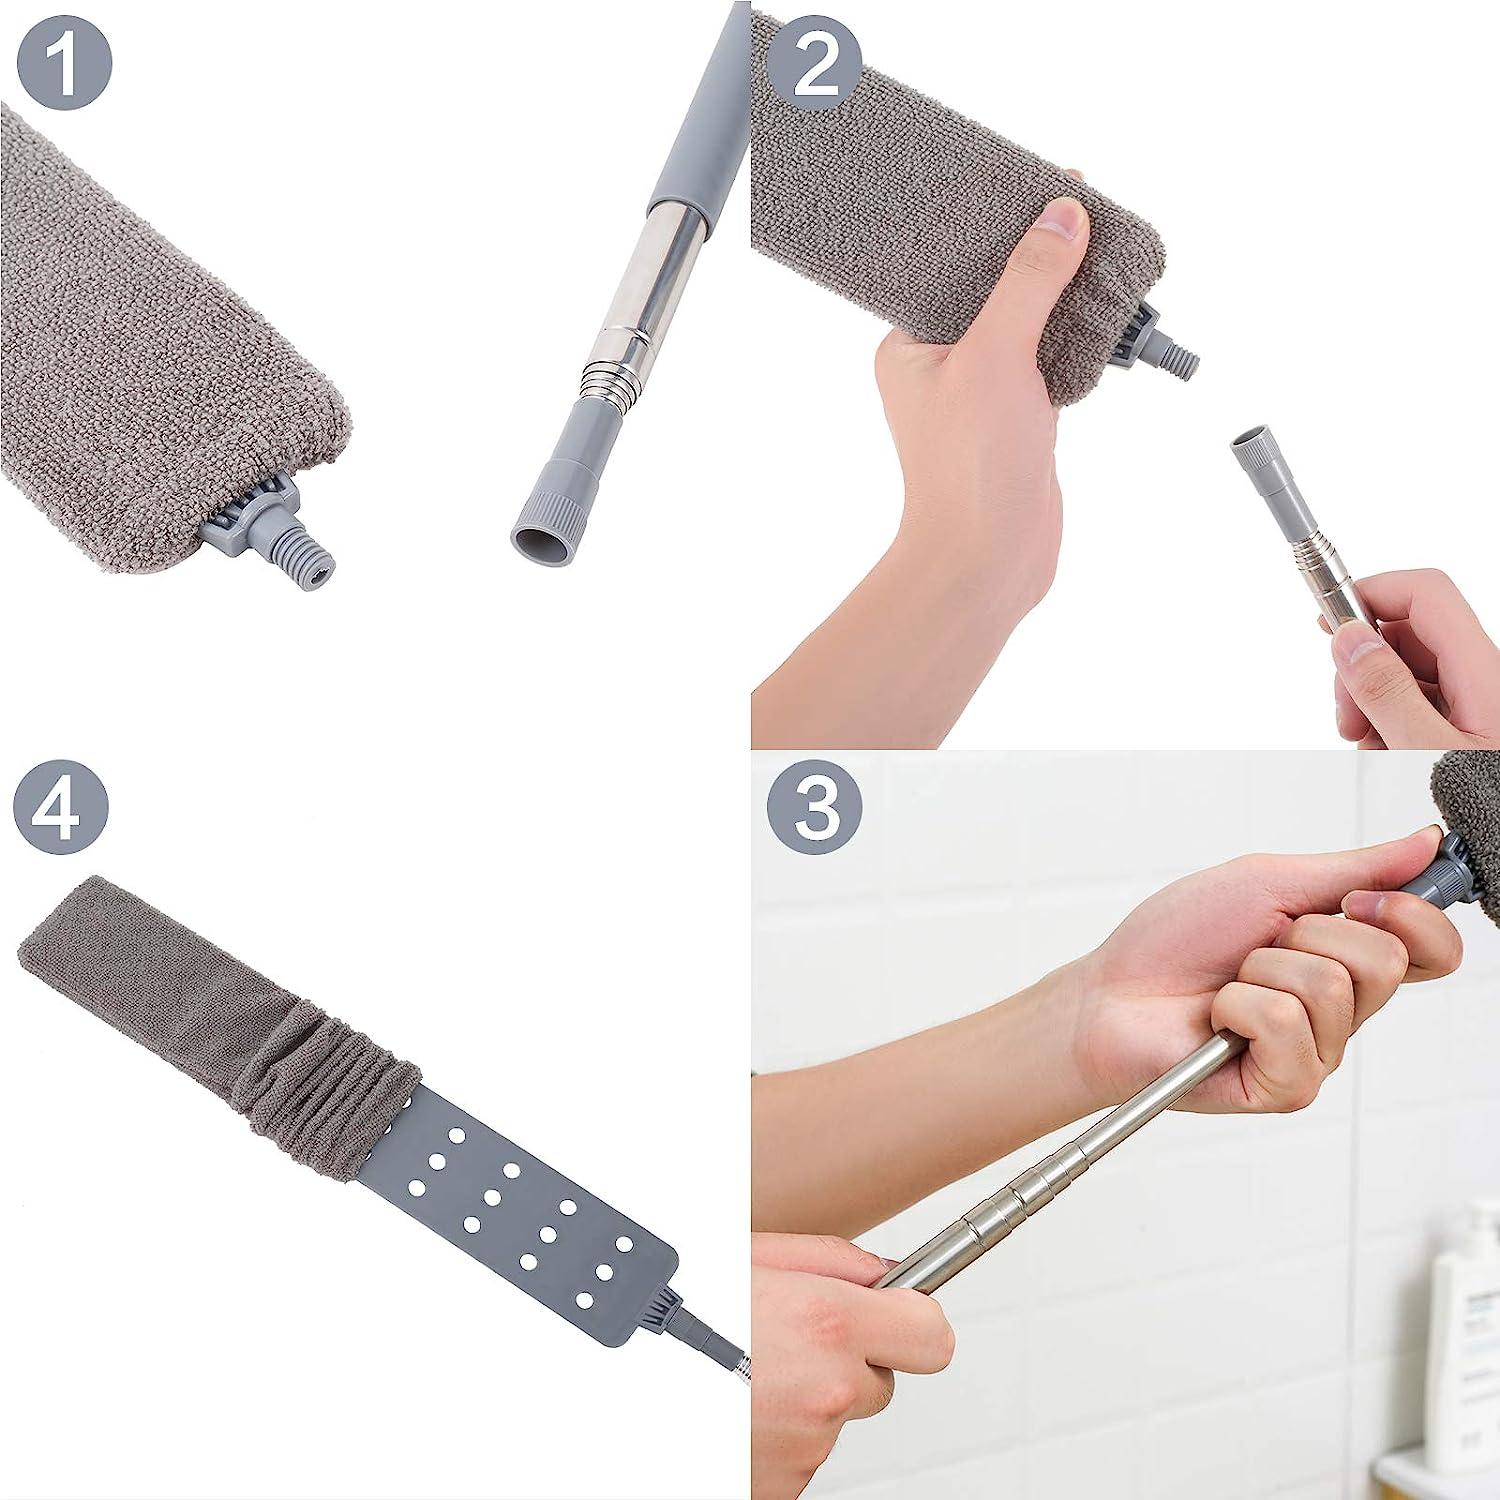 Retractable Gap Dust Cleaner, Microfiber Hand Duster, Under Fridge &  Appliance Duster, Telescopic Dust Brush for Wet and Dry, Cleaning Tools for  Home